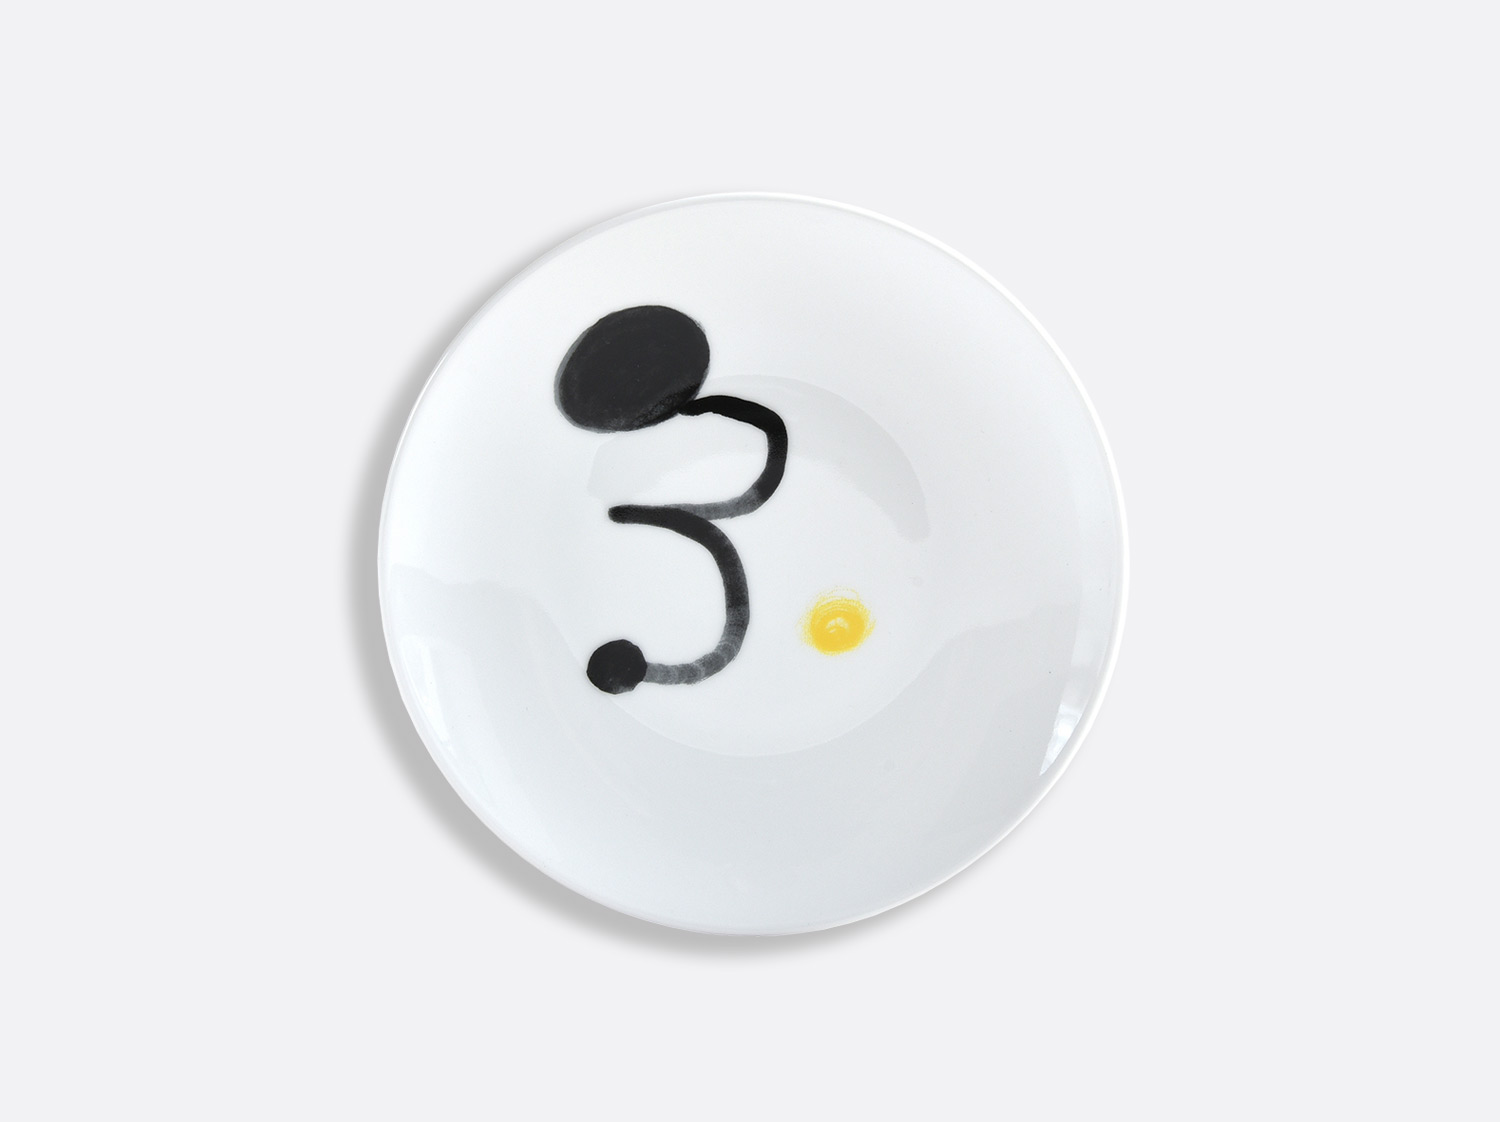 China 2 Bread and butter plates 16 cm Jaune - Page 52 of the collection PARLER SEUL - Joan Miro | Bernardaud